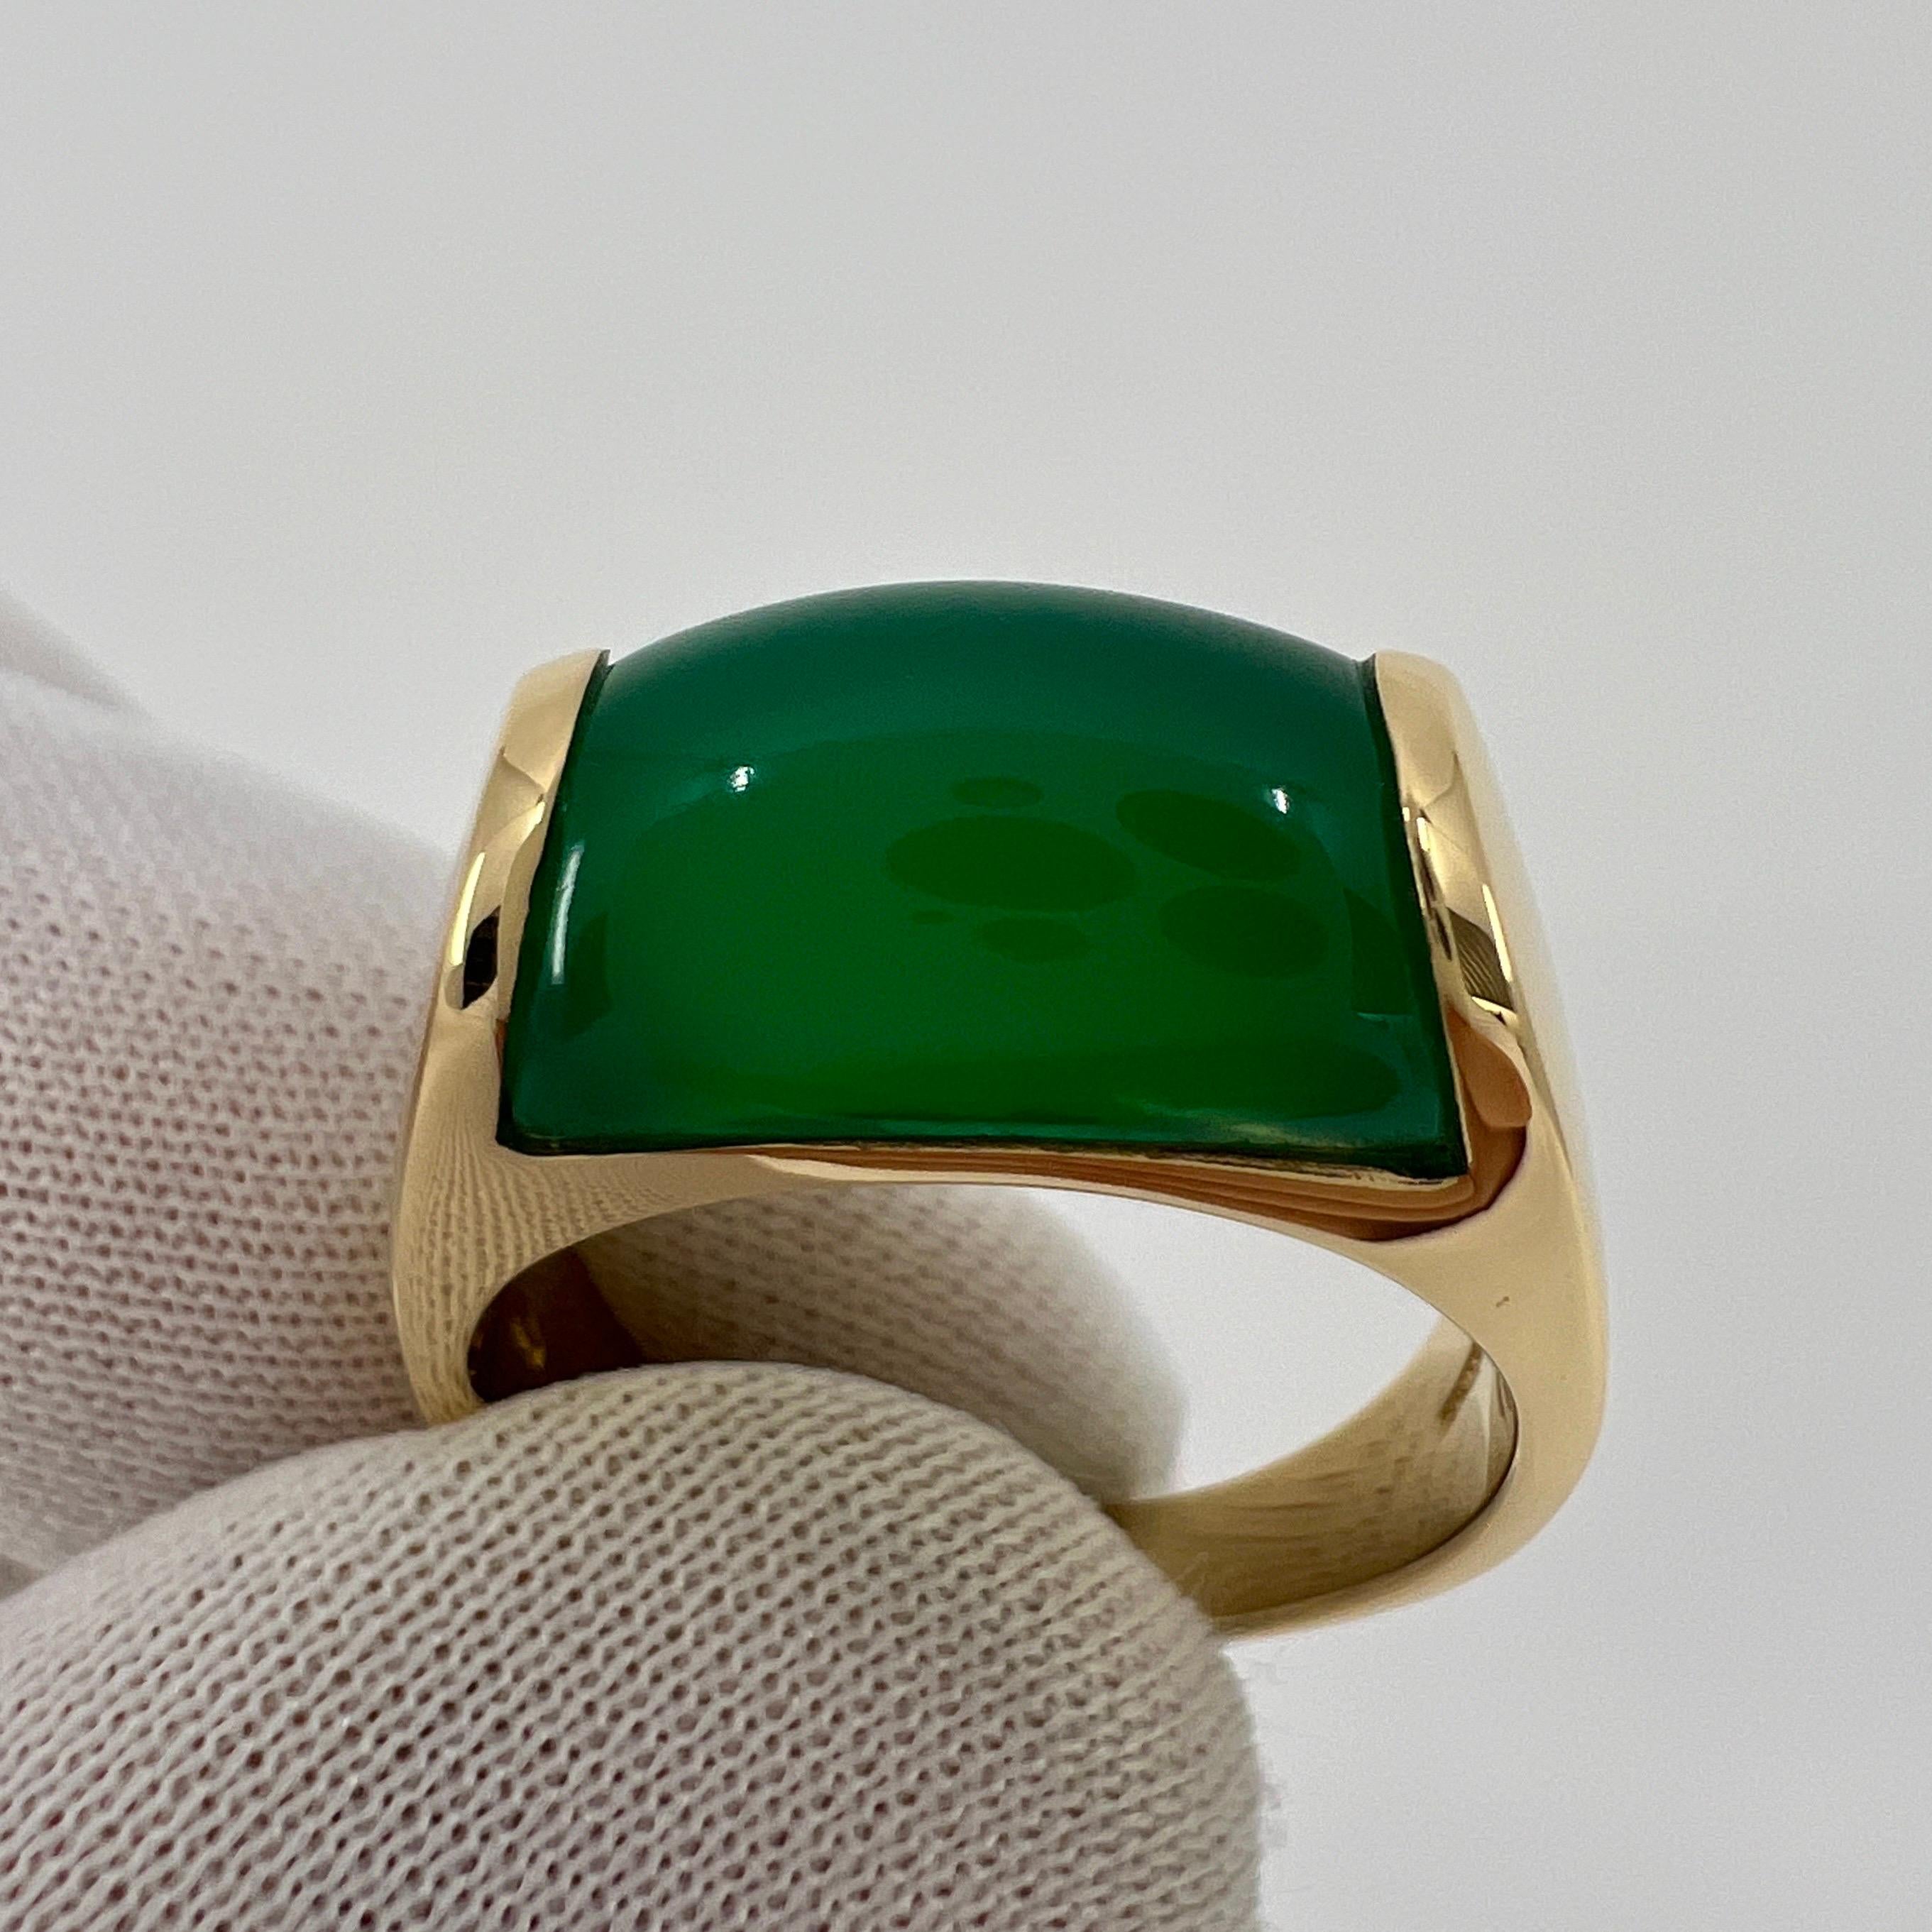 Rare Bvlgari Vivid Green Chalcedony 18k Yellow Gold Ring.

Beautiful domed 'glowing' green chalcedony set in a fine 18k yellow gold tension set ring.

In excellent condition, has been professionally polished and cleaned.

Ring size: UK N1/2 - US 7 -